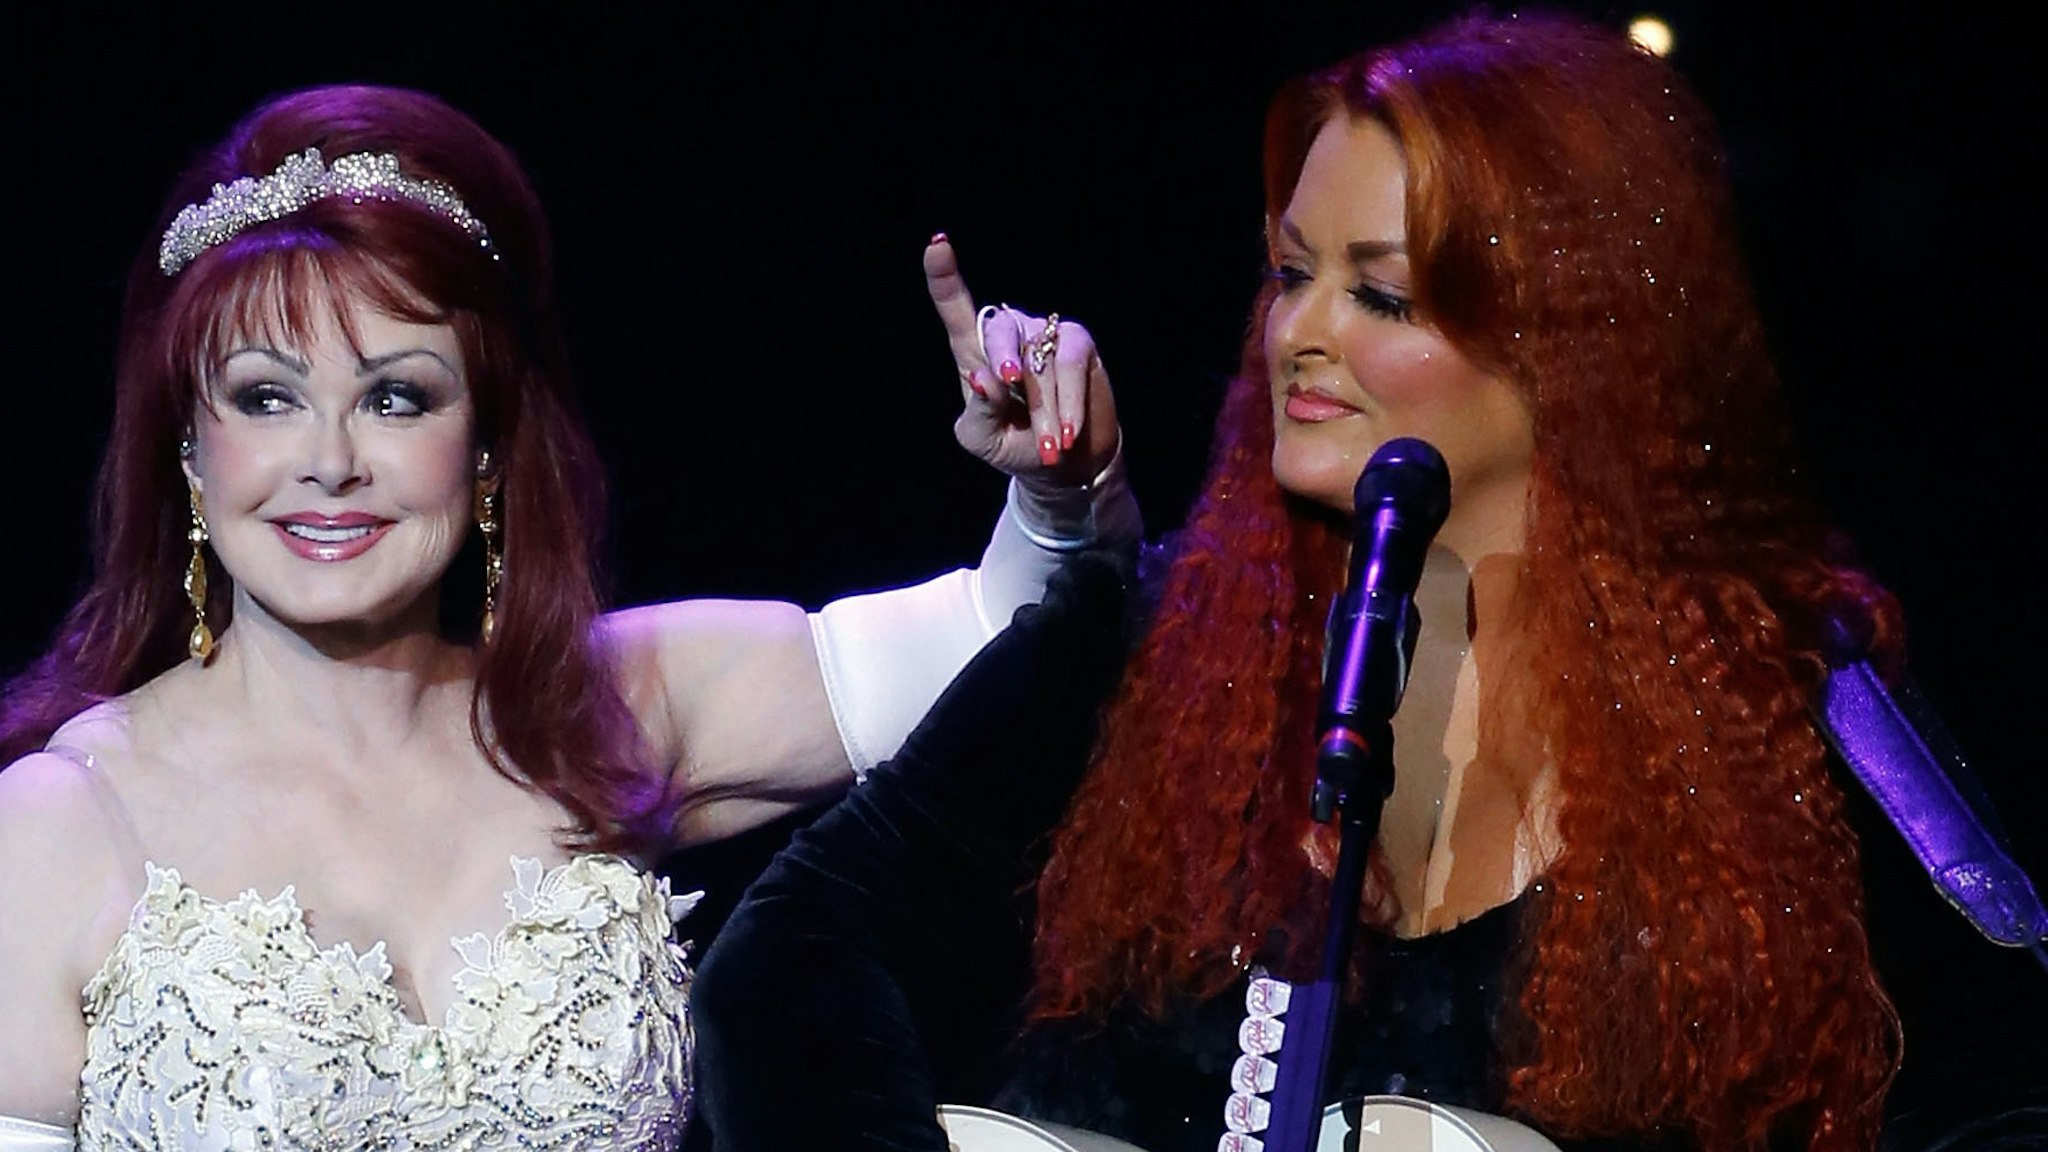 Recording artists Naomi Judd (L) and Wynonna Judd perform during the launch of their nine-show residency "Girls Night Out" at The Venetian Las Vegas on October 7, 2015 in Las Vegas, Nevada.